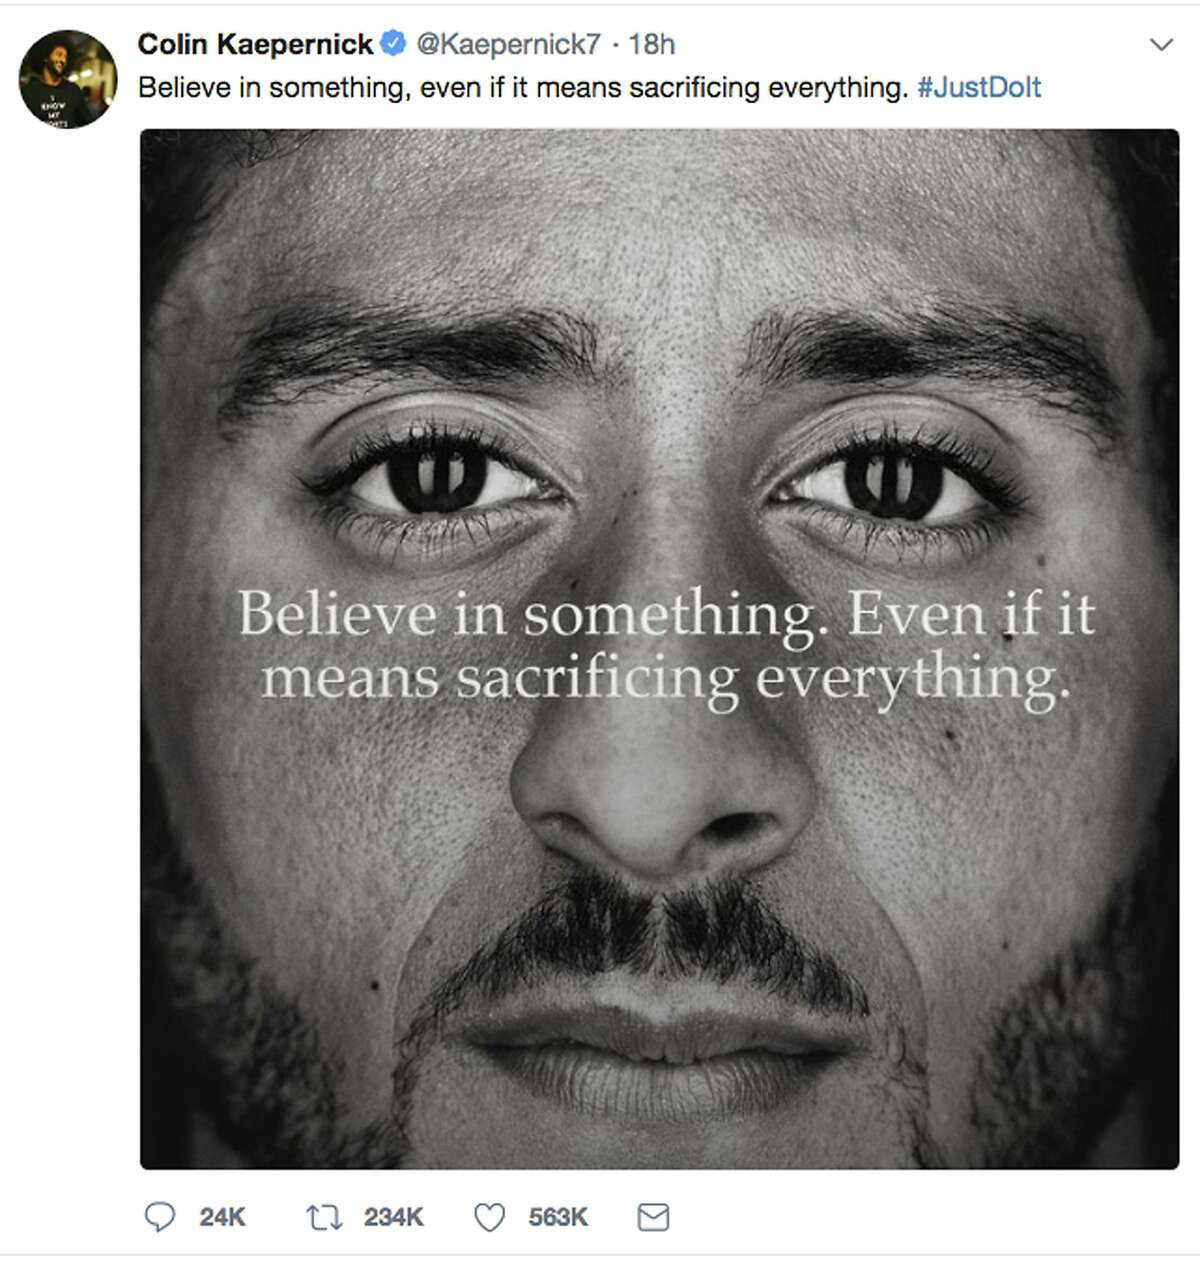 This image taken from the Twitter account of the former National Football League player Colin Kaepernick shows a Nike advertisement featuring him that was posted Monday, Sept. 3, 2018. Kaepernick already had a deal with Nike that was set to expire, but it was renegotiated into a multi-year deal to make him one of the faces of Nike's 30th anniversary "Just Do It" campaign, according to a person familiar with the contract. (Twitter via AP)